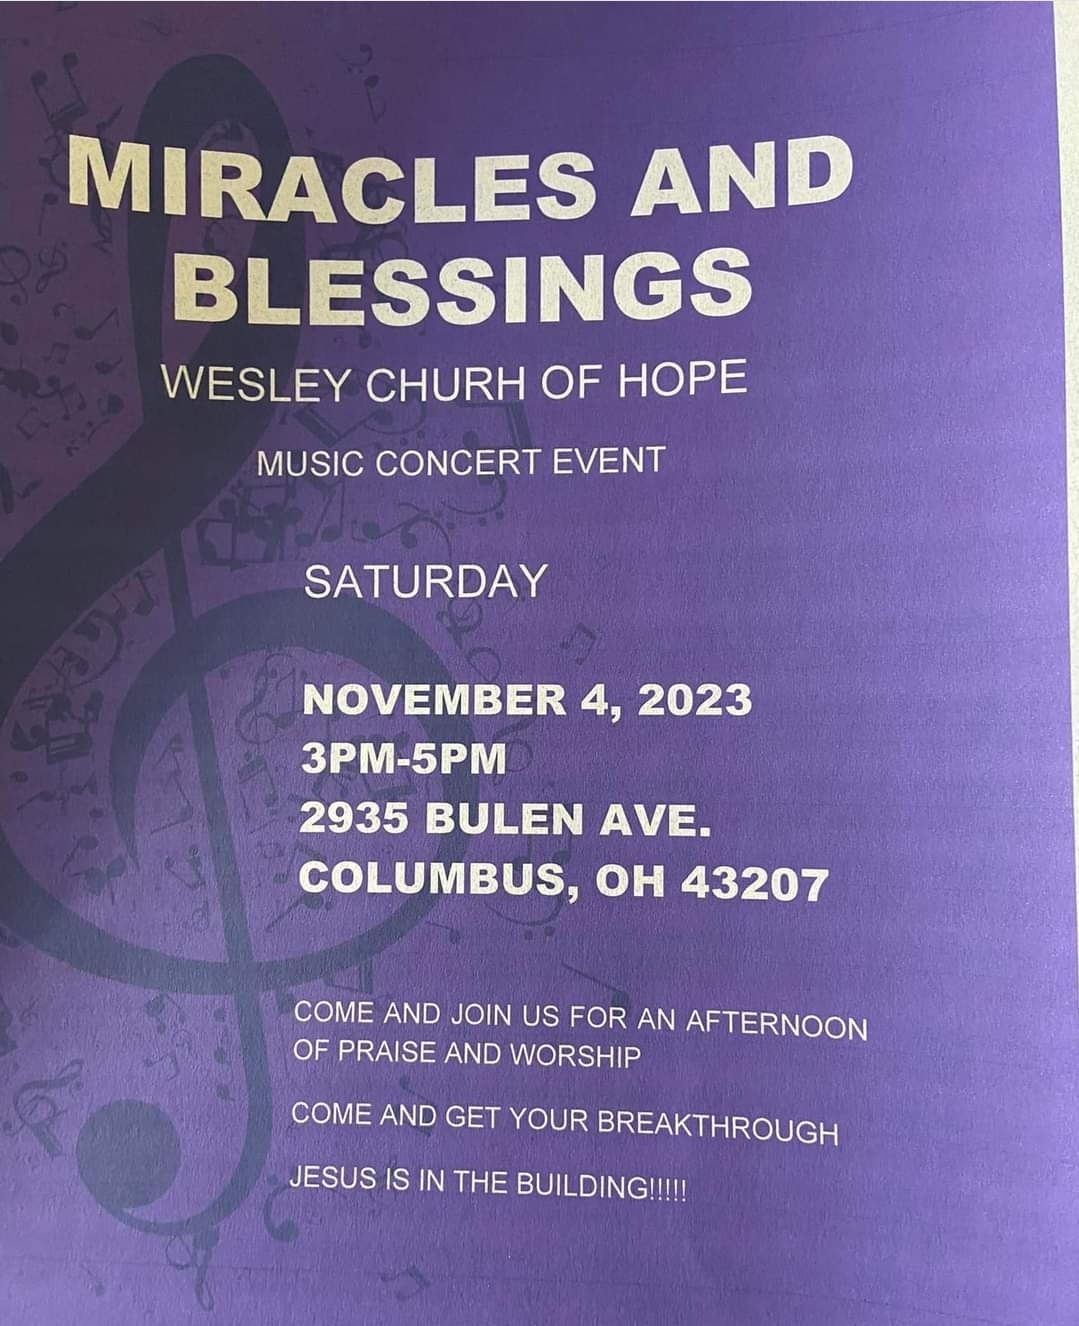 Miracles and blessing concert flyer